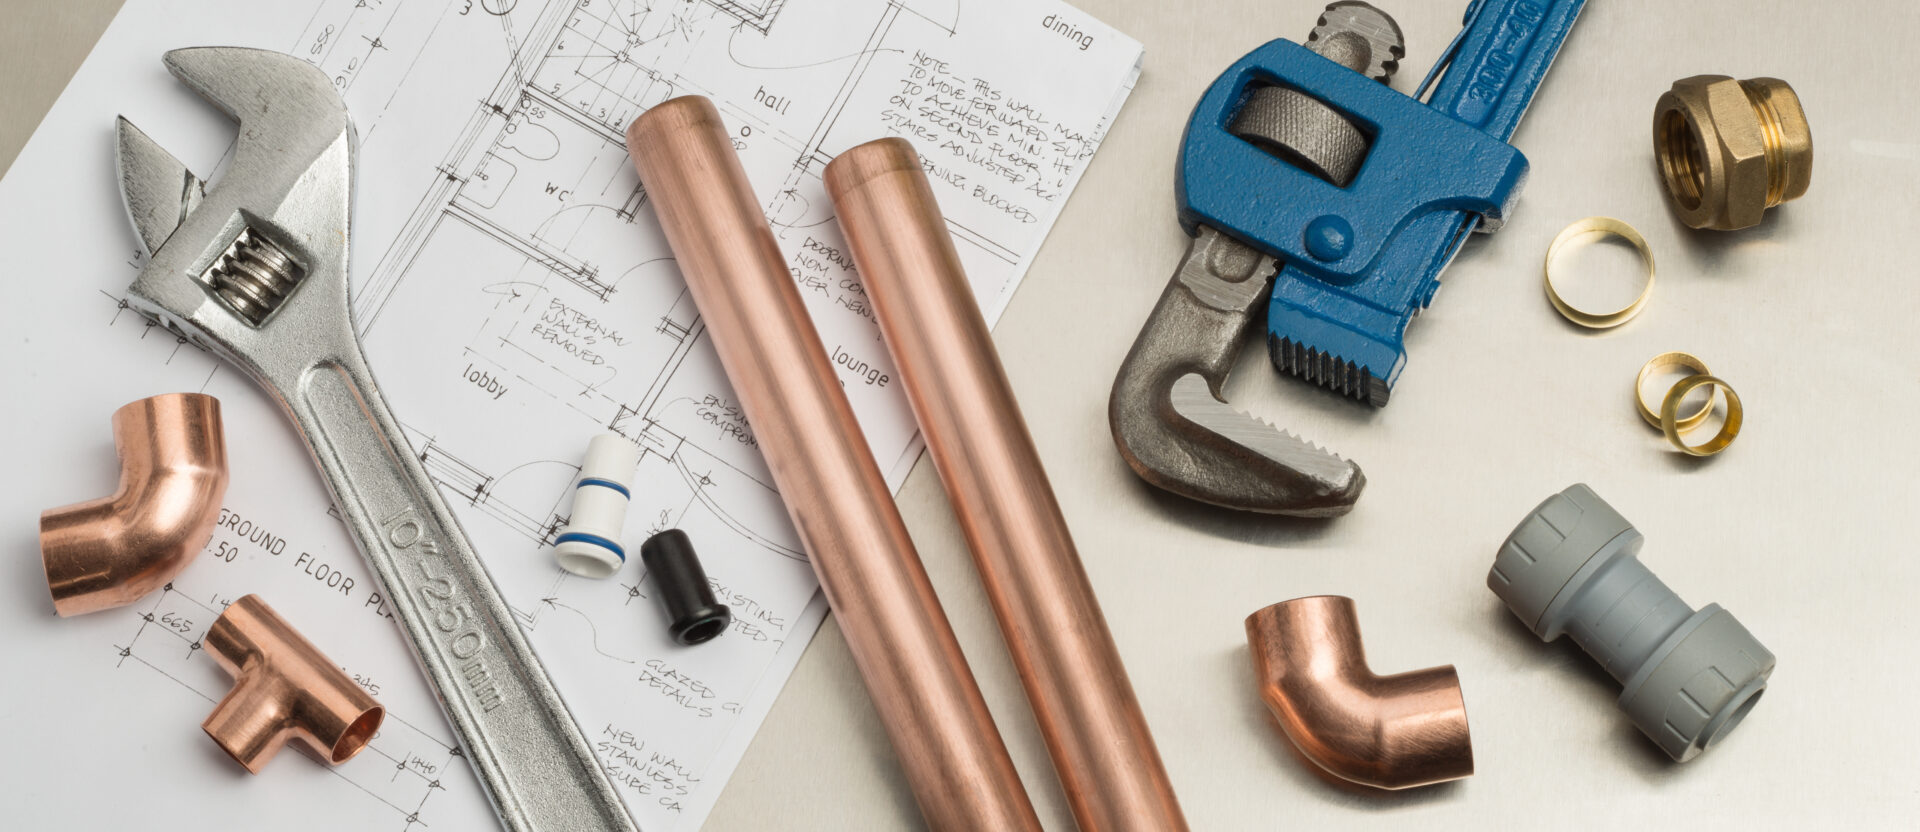 Plumbers tools and plumbing materials including copper pipe, elbow joint, wrench and spanner on top of architects house plans. MidCity Plumbers